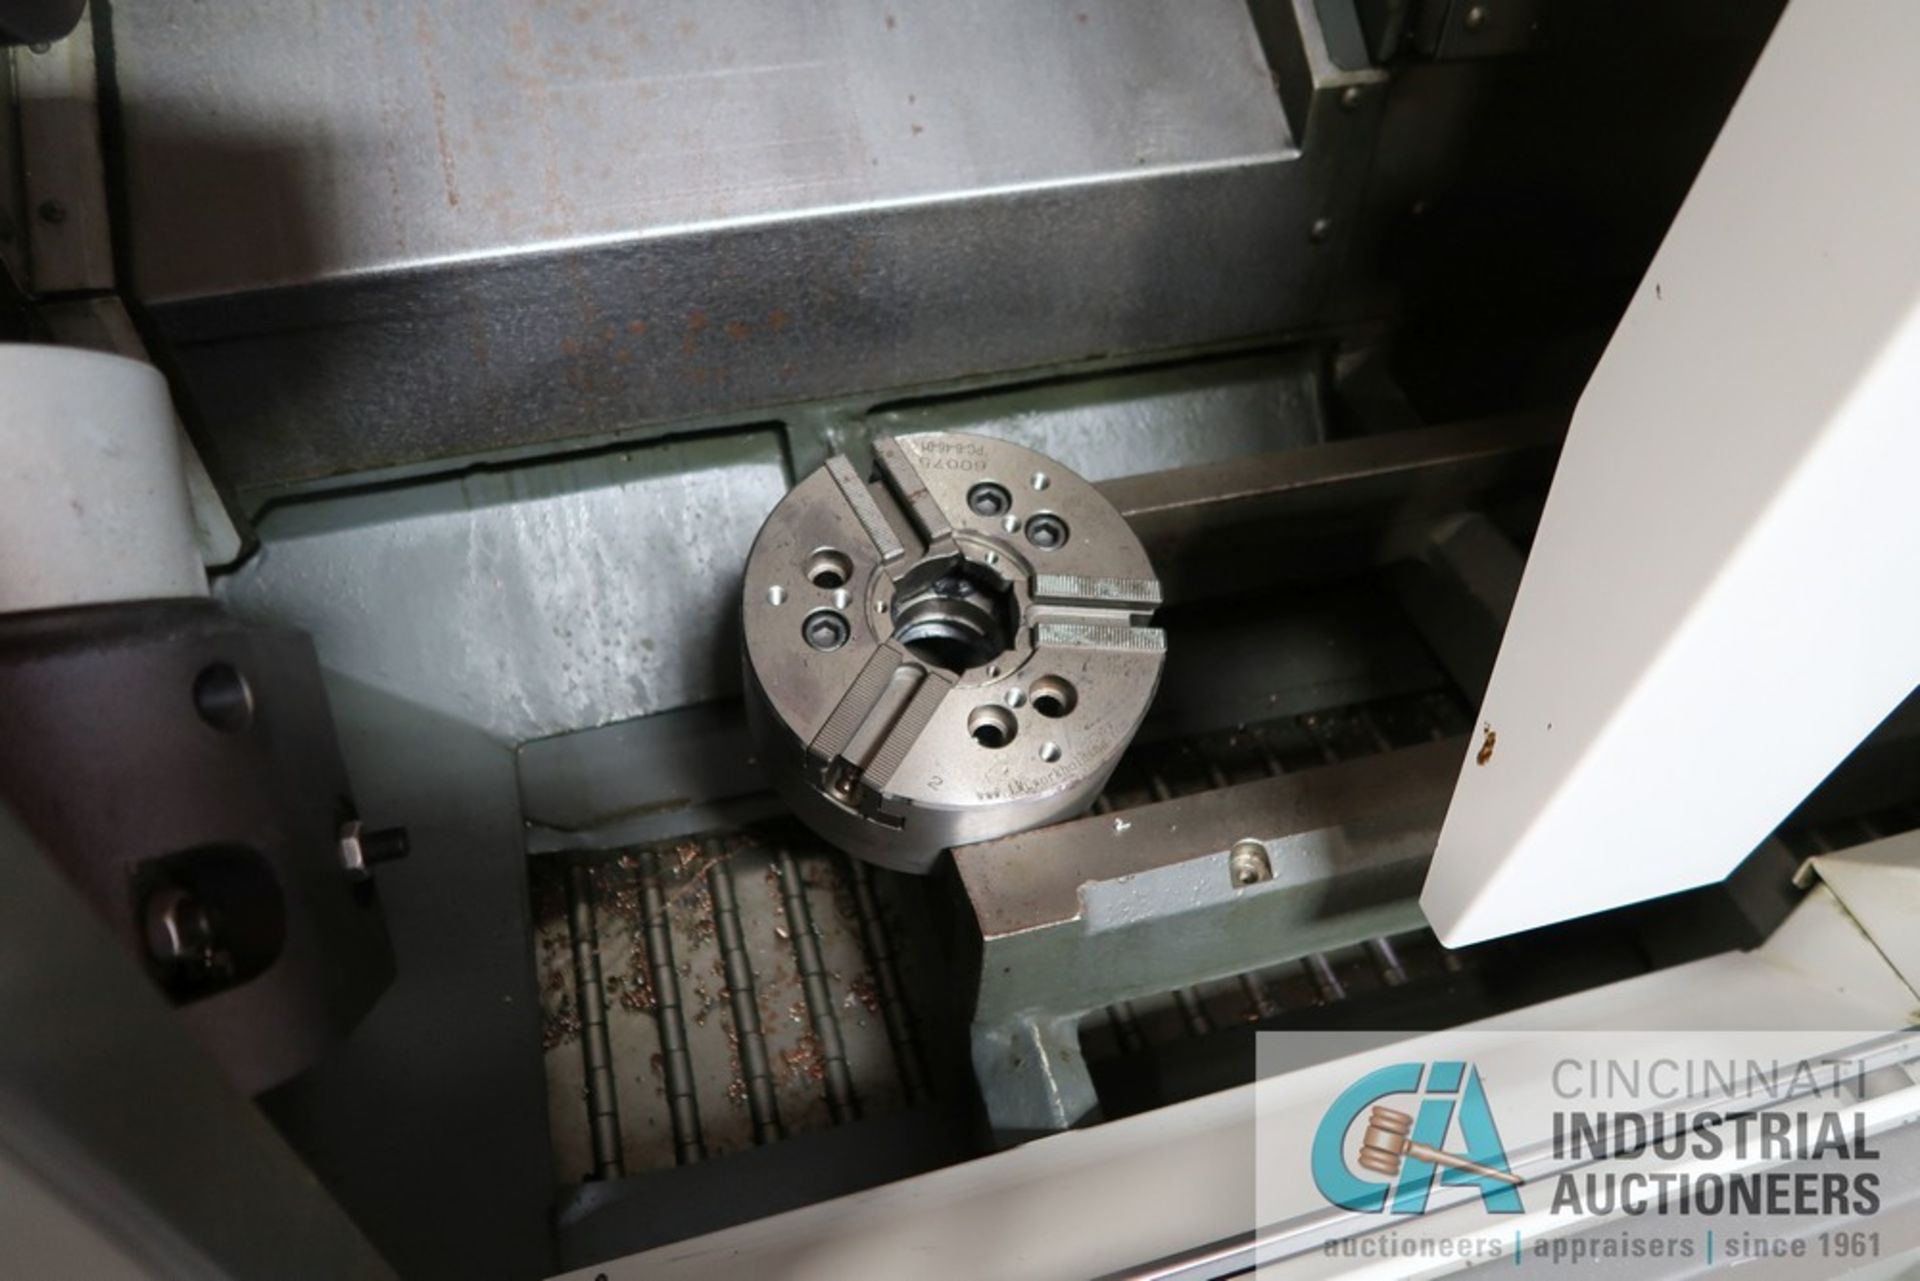 HAAS MODEL ST10 CNC TURNING CENTER; S/N 3108101, COLLET CHUCK, 12-POSITION TURRET, TOOL PRESETTER, - Image 5 of 10